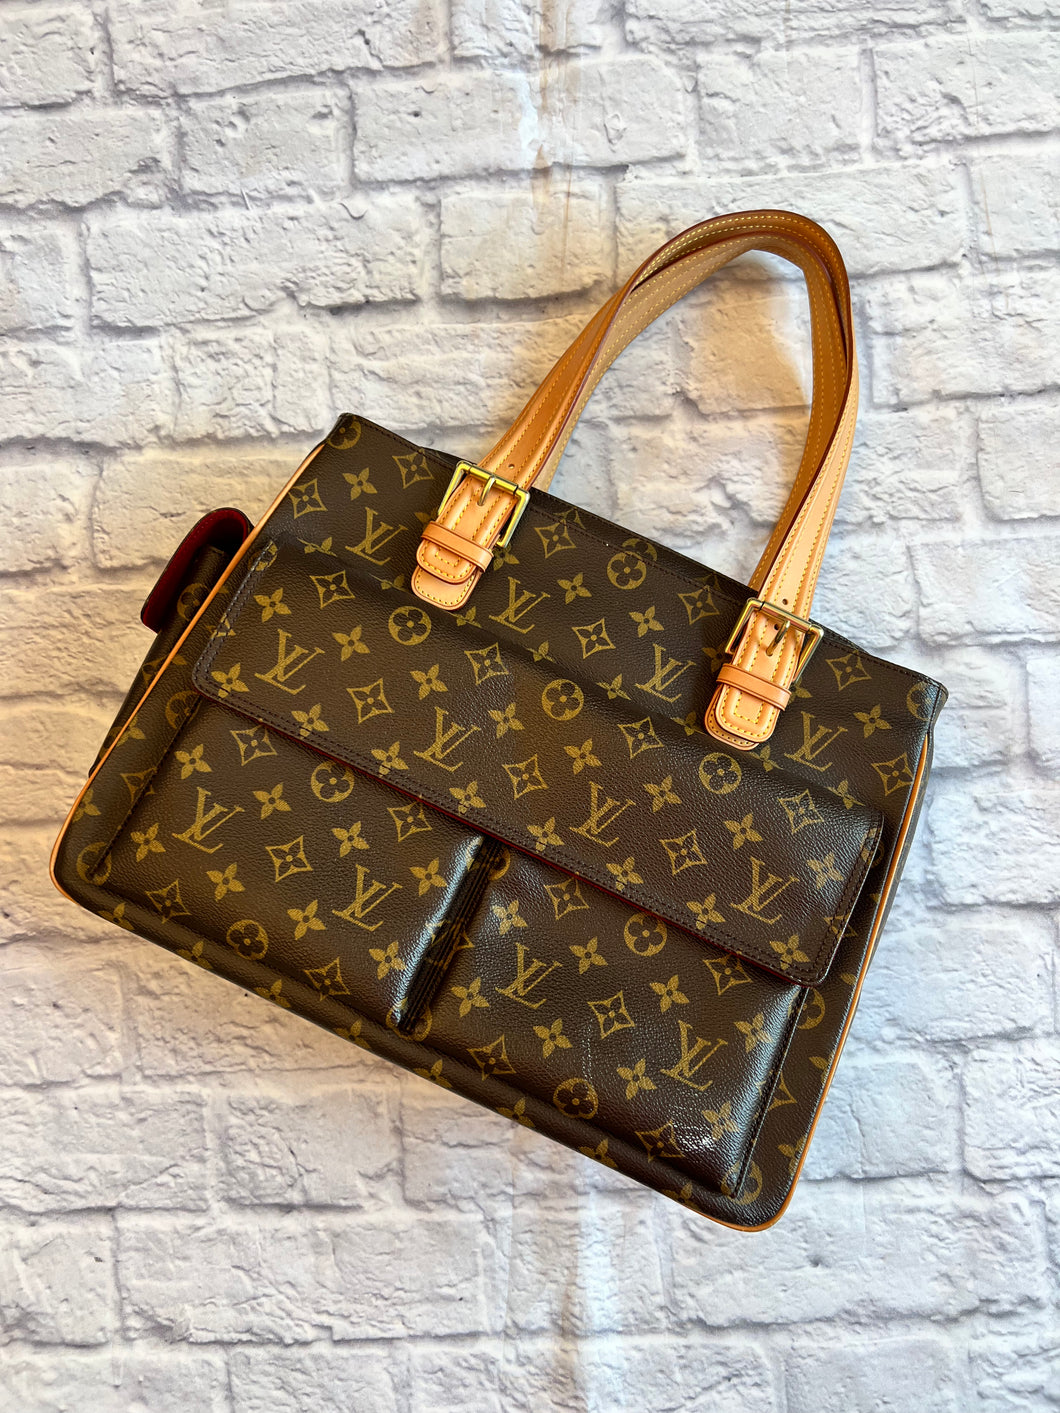 louis vuitton bag with pockets